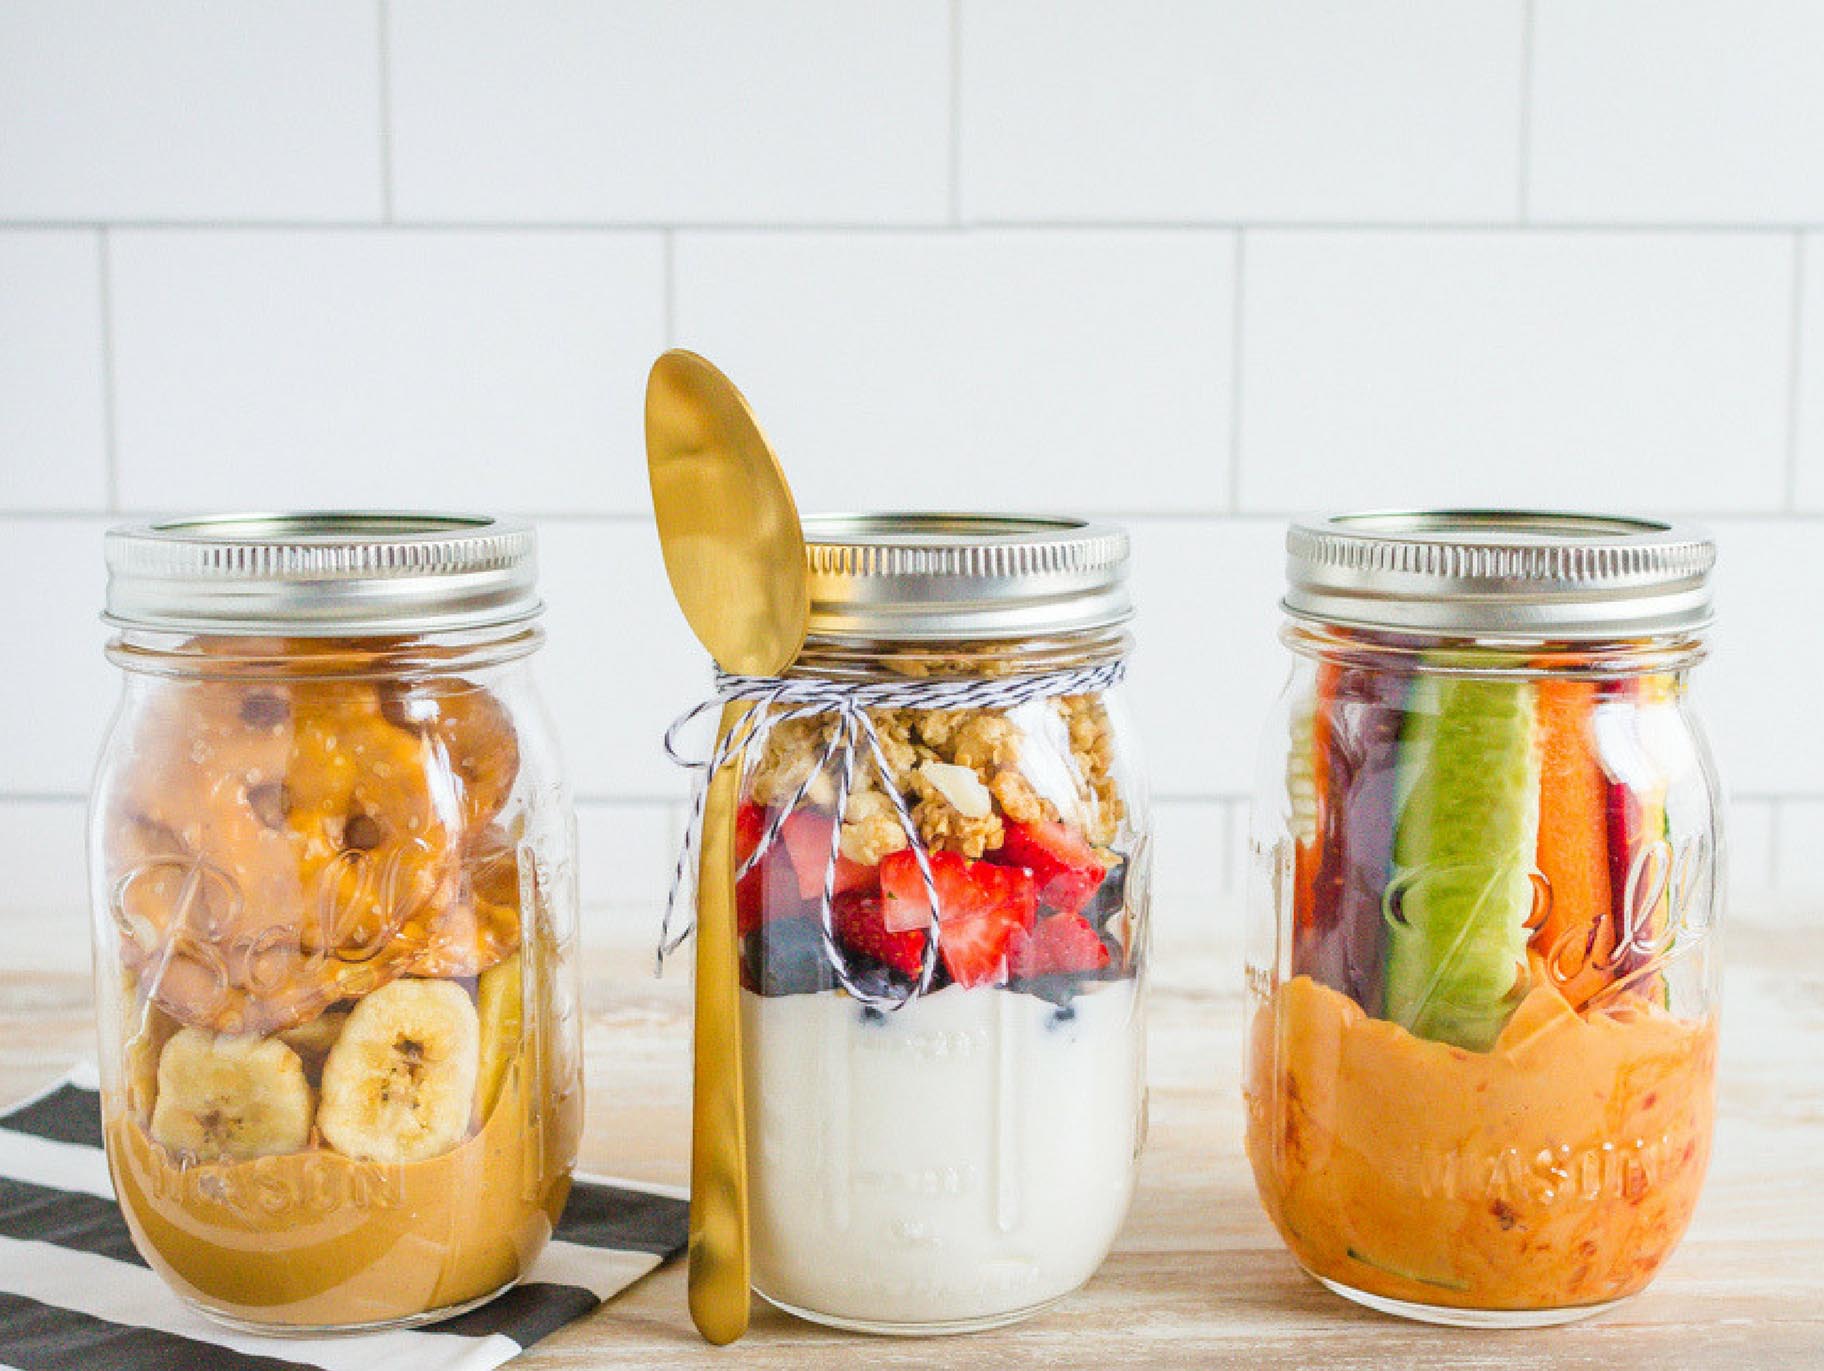 4 Healthy Grab-and-Go Snack Jars